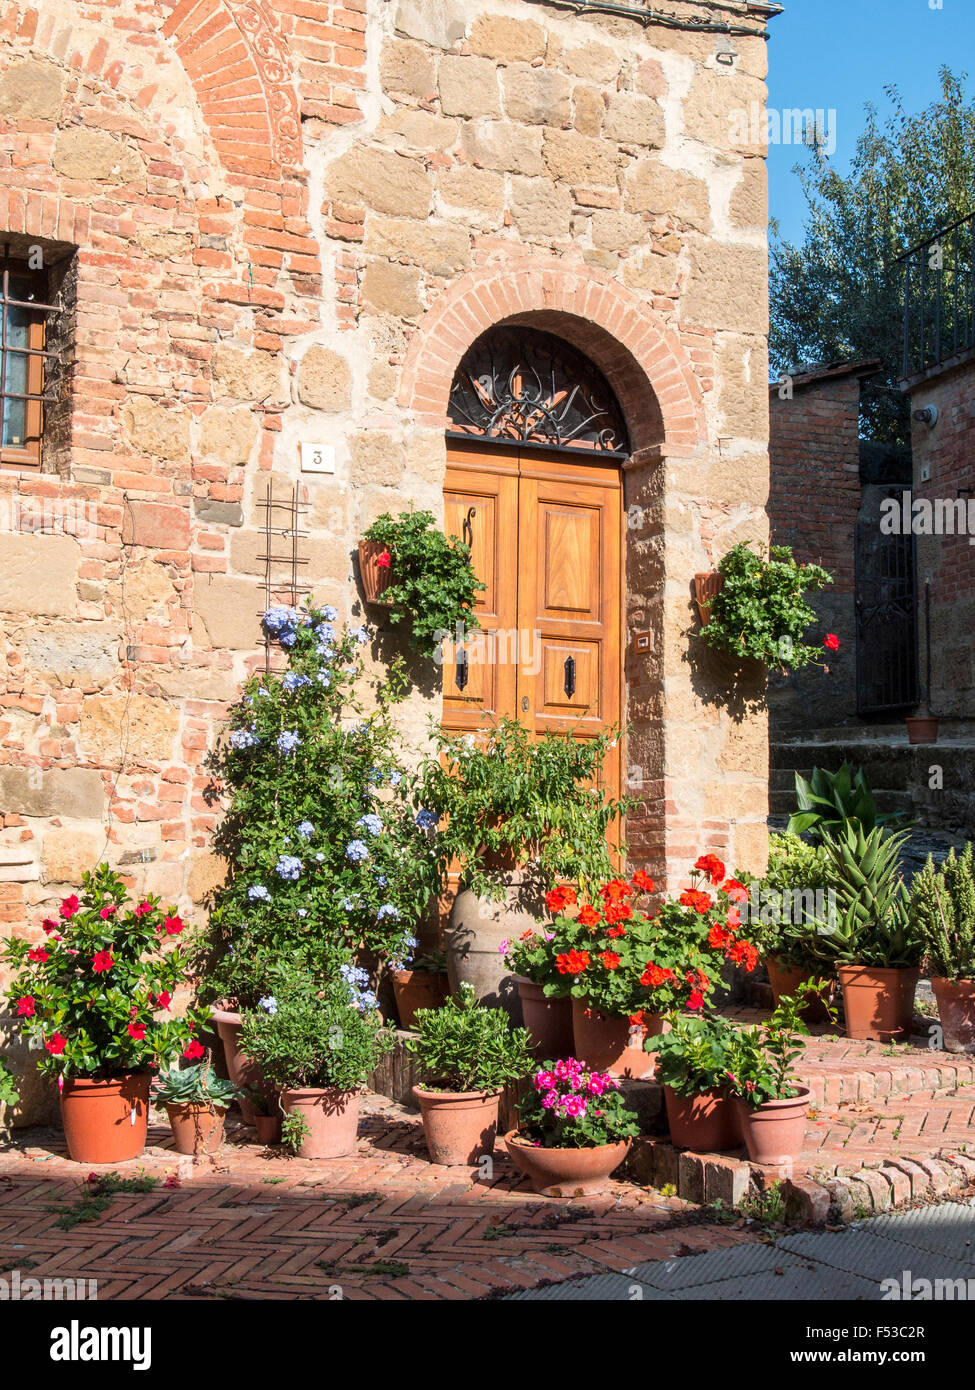 Europe, Italy, Tuscany, Monticchiello.  Flower displays near house in the medieval town of Monticchiello. Stock Photo